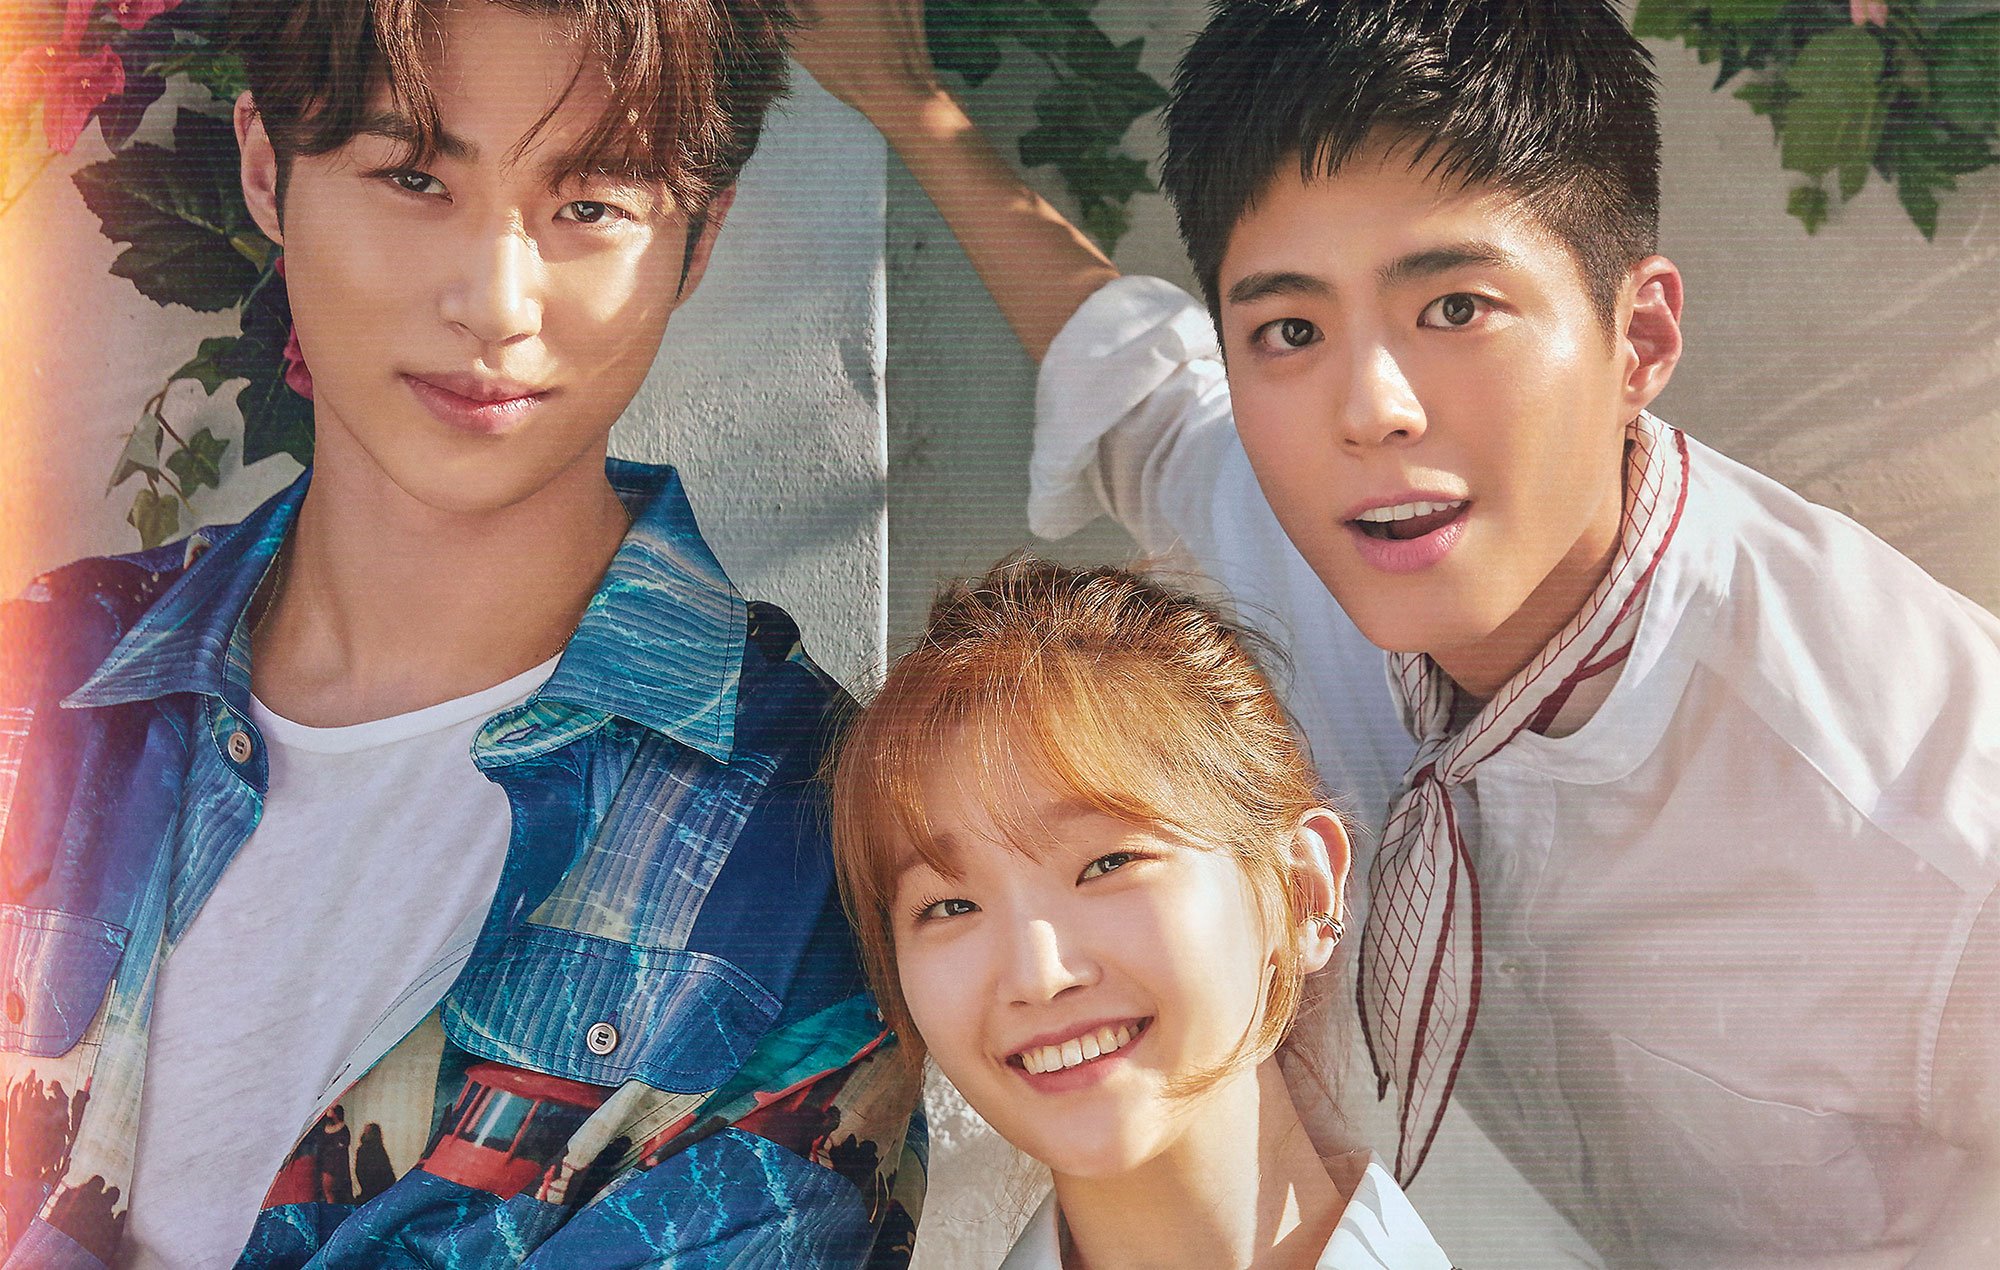 'Record of Youth' K-drama characters smiling in relation to a breakup.